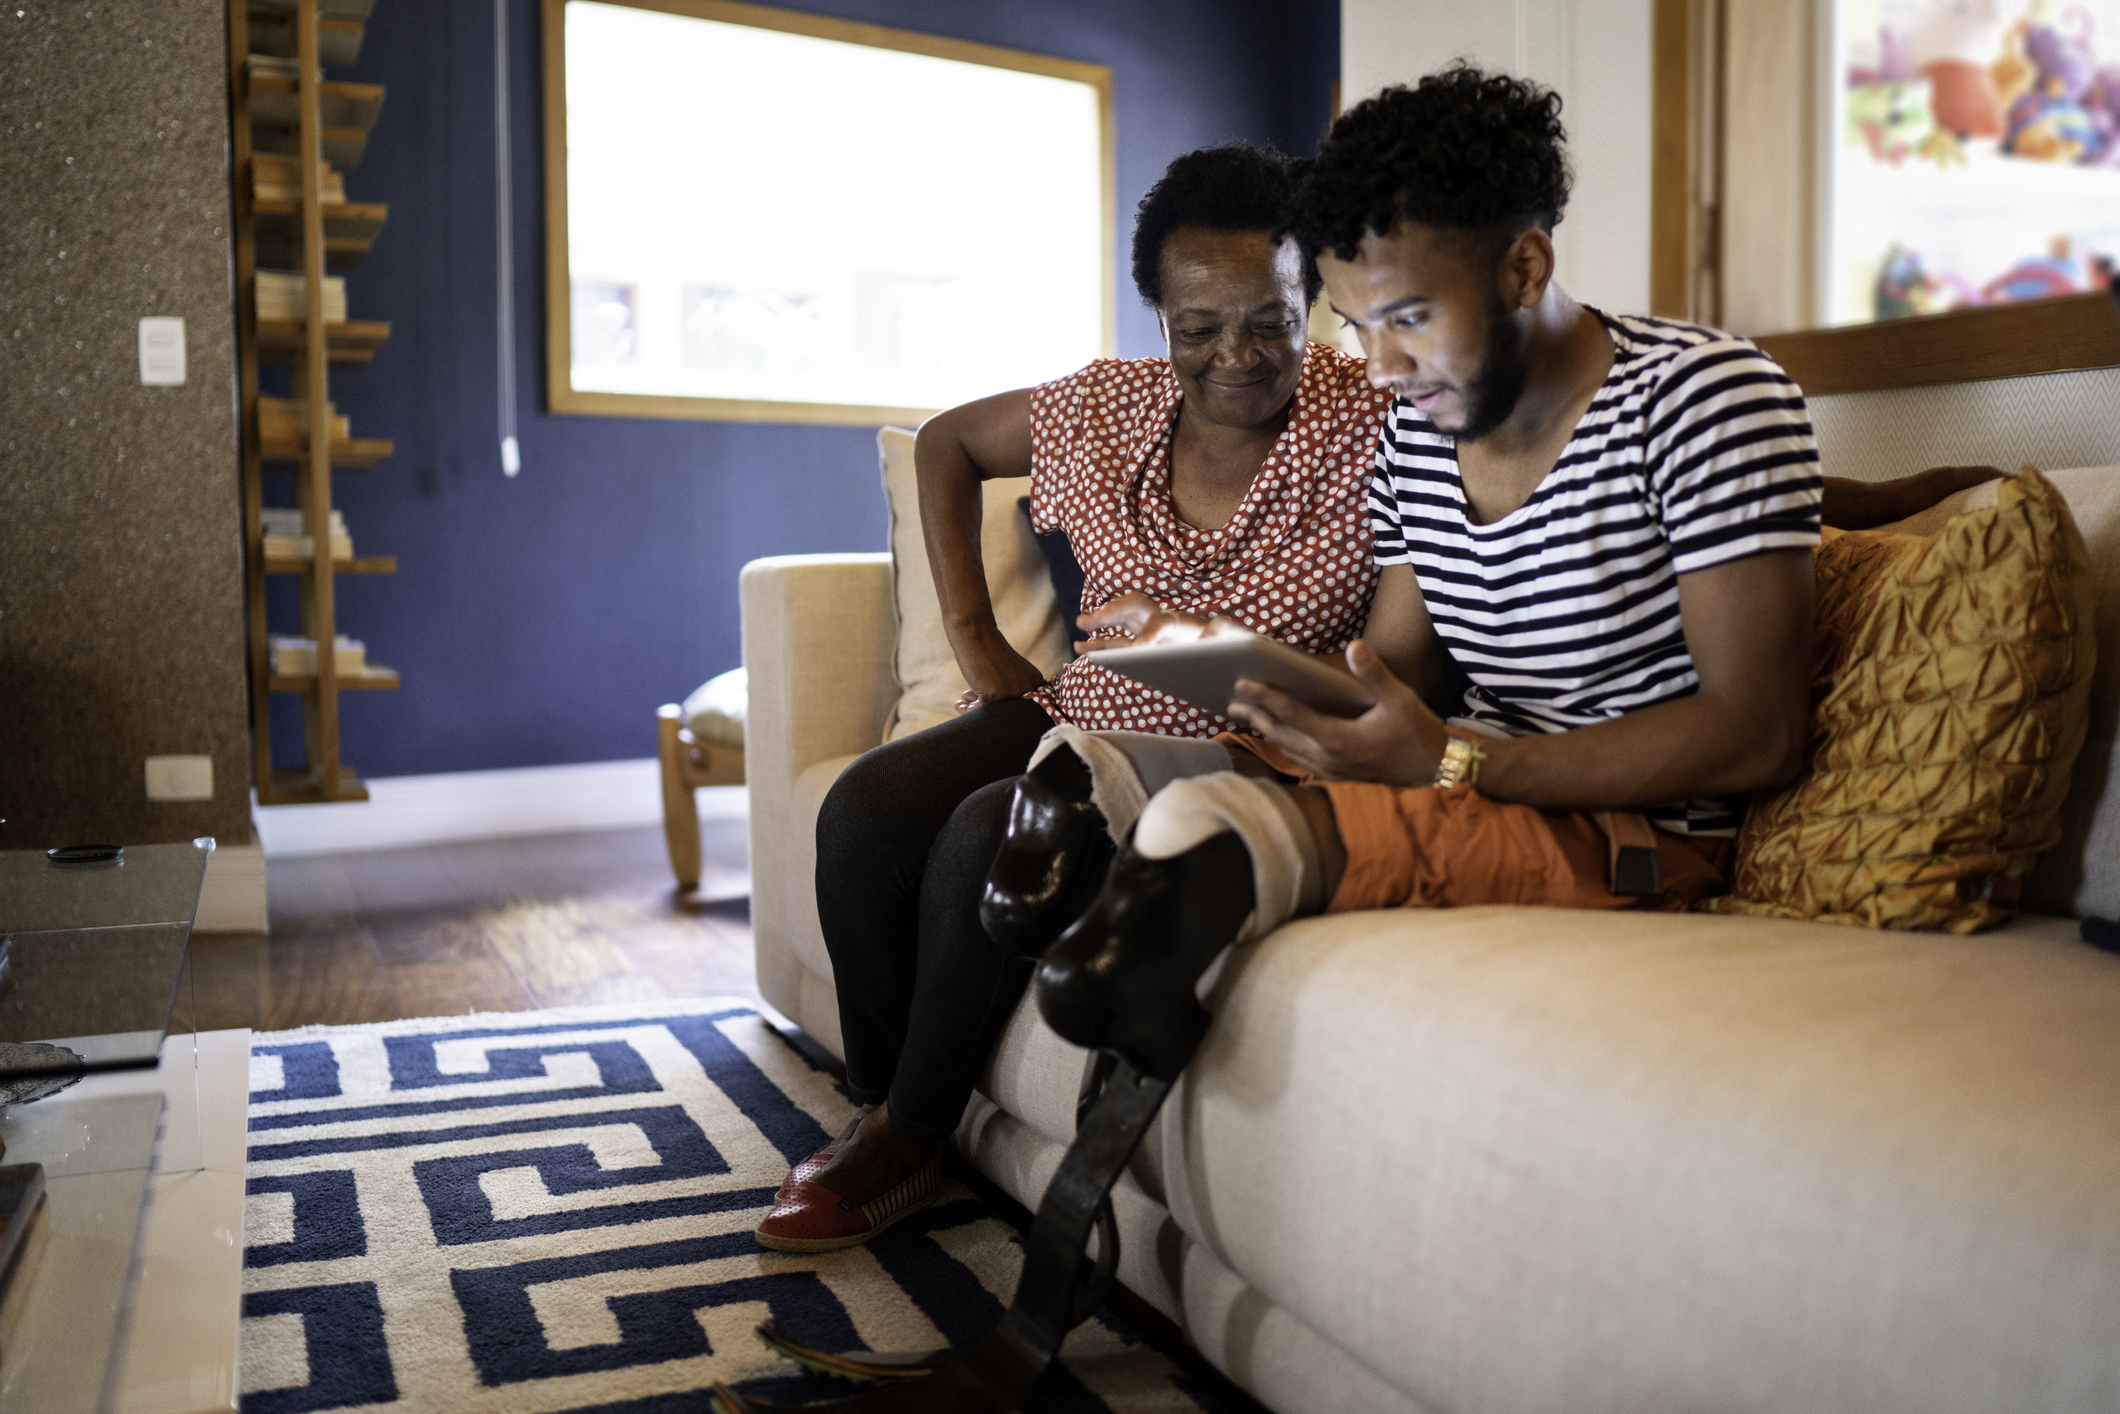 A grandmother and grandson, who has a physical disability, view a digital tablet while seated on a sofa in a home in Brazil.